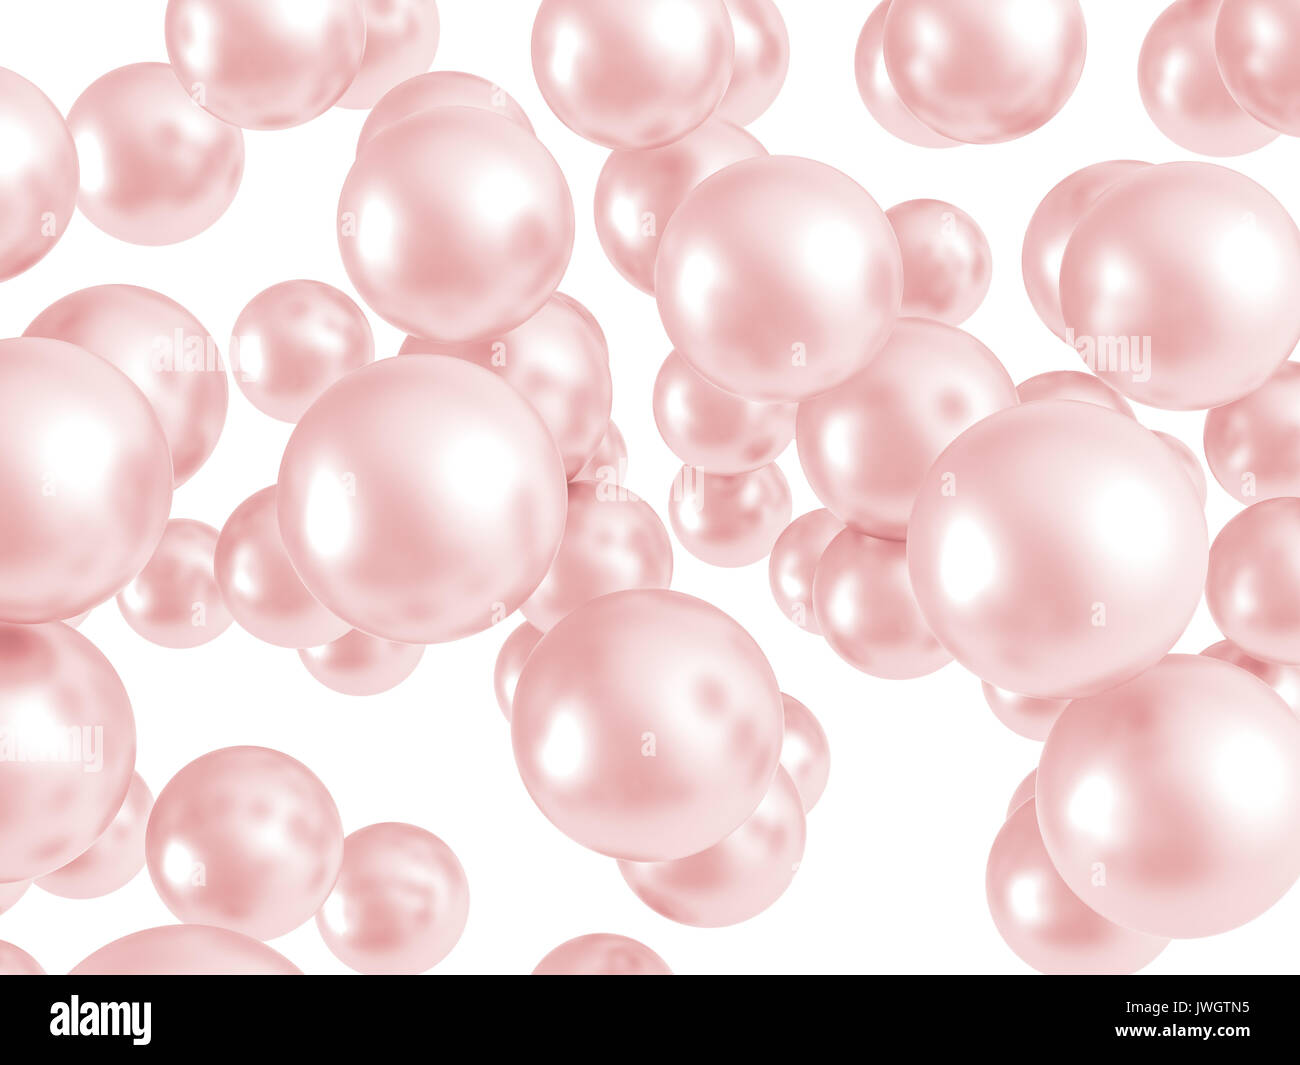 Pink Pearl Platform Cosmetics Display Background Wallpaper Image For Free  Download - Pngtree